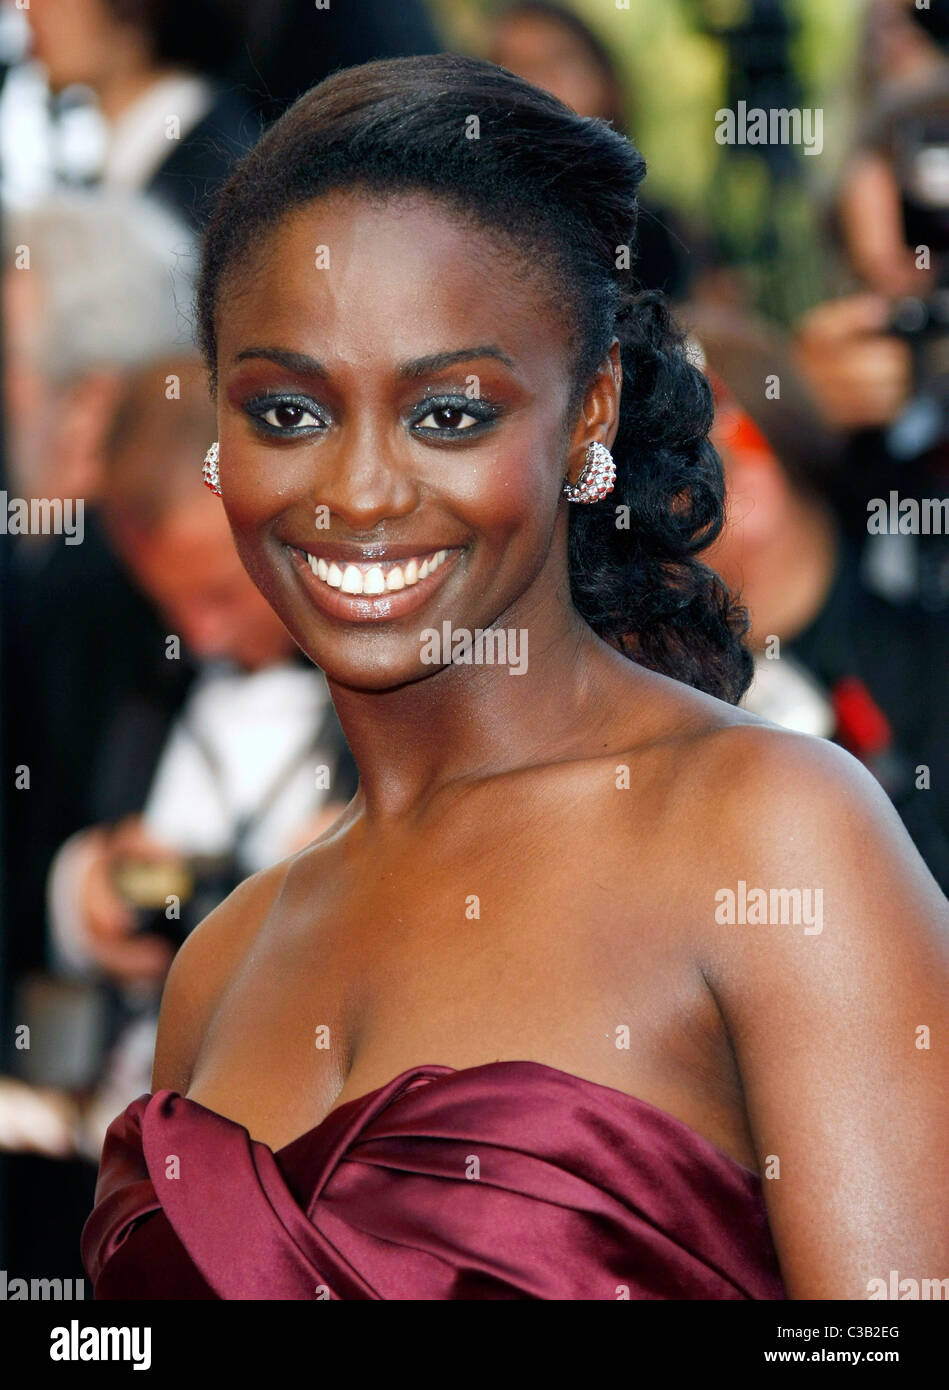 Aissa Maiga 2009 Cannes International Film Festival - Day 10 - Premiere of 'The Imaginarium of Doctor Parn' - Arrivals Cannes, Stock Photo